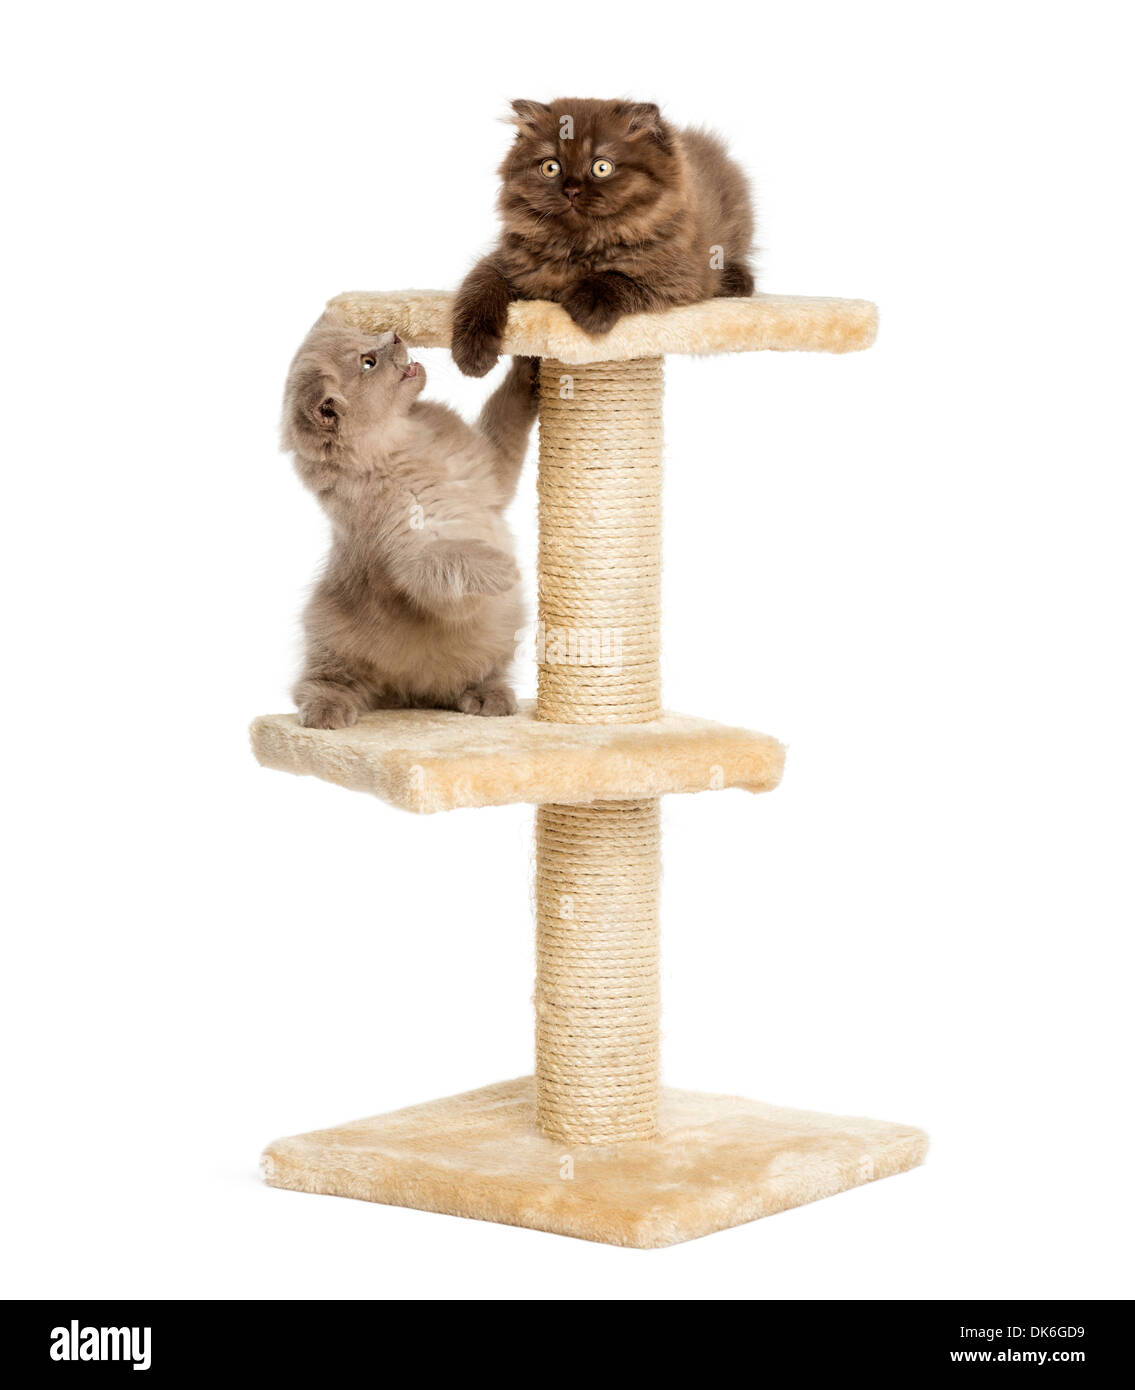 Highland fold kittens playing on a cat tree against white background Stock Photo